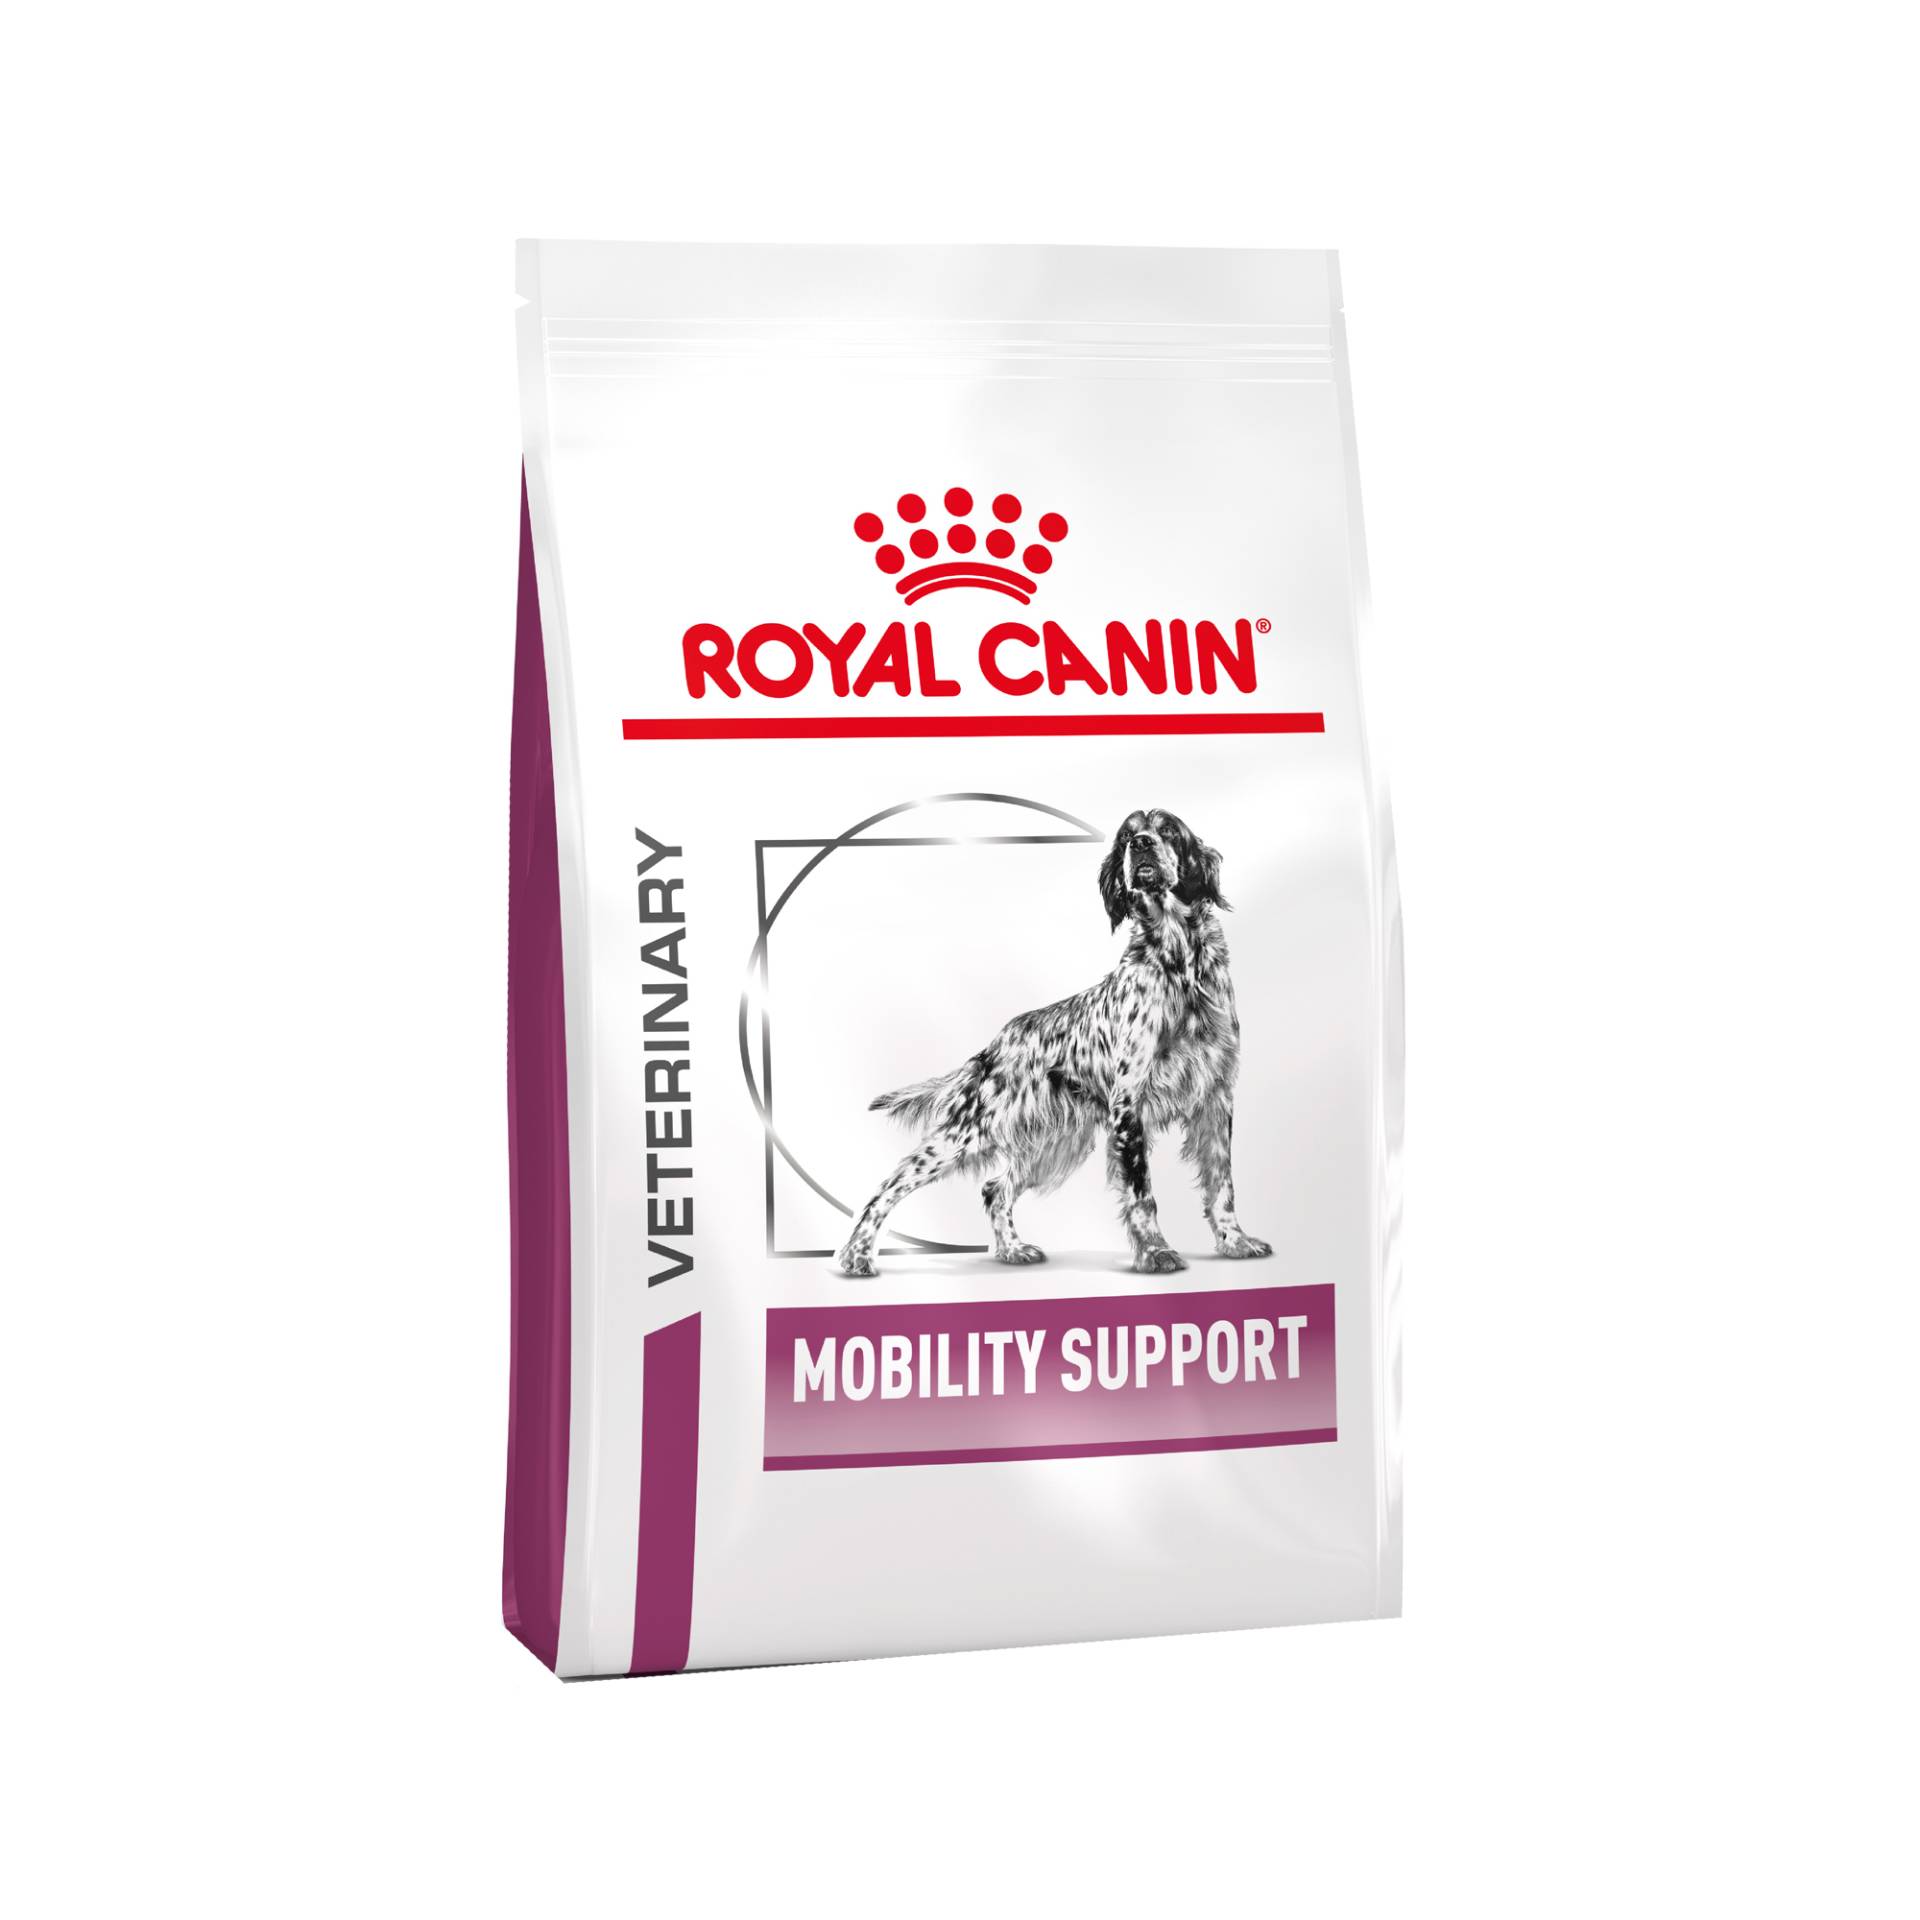 Royal Canin VHN Mobility Support - 12 kg von Royal Canin